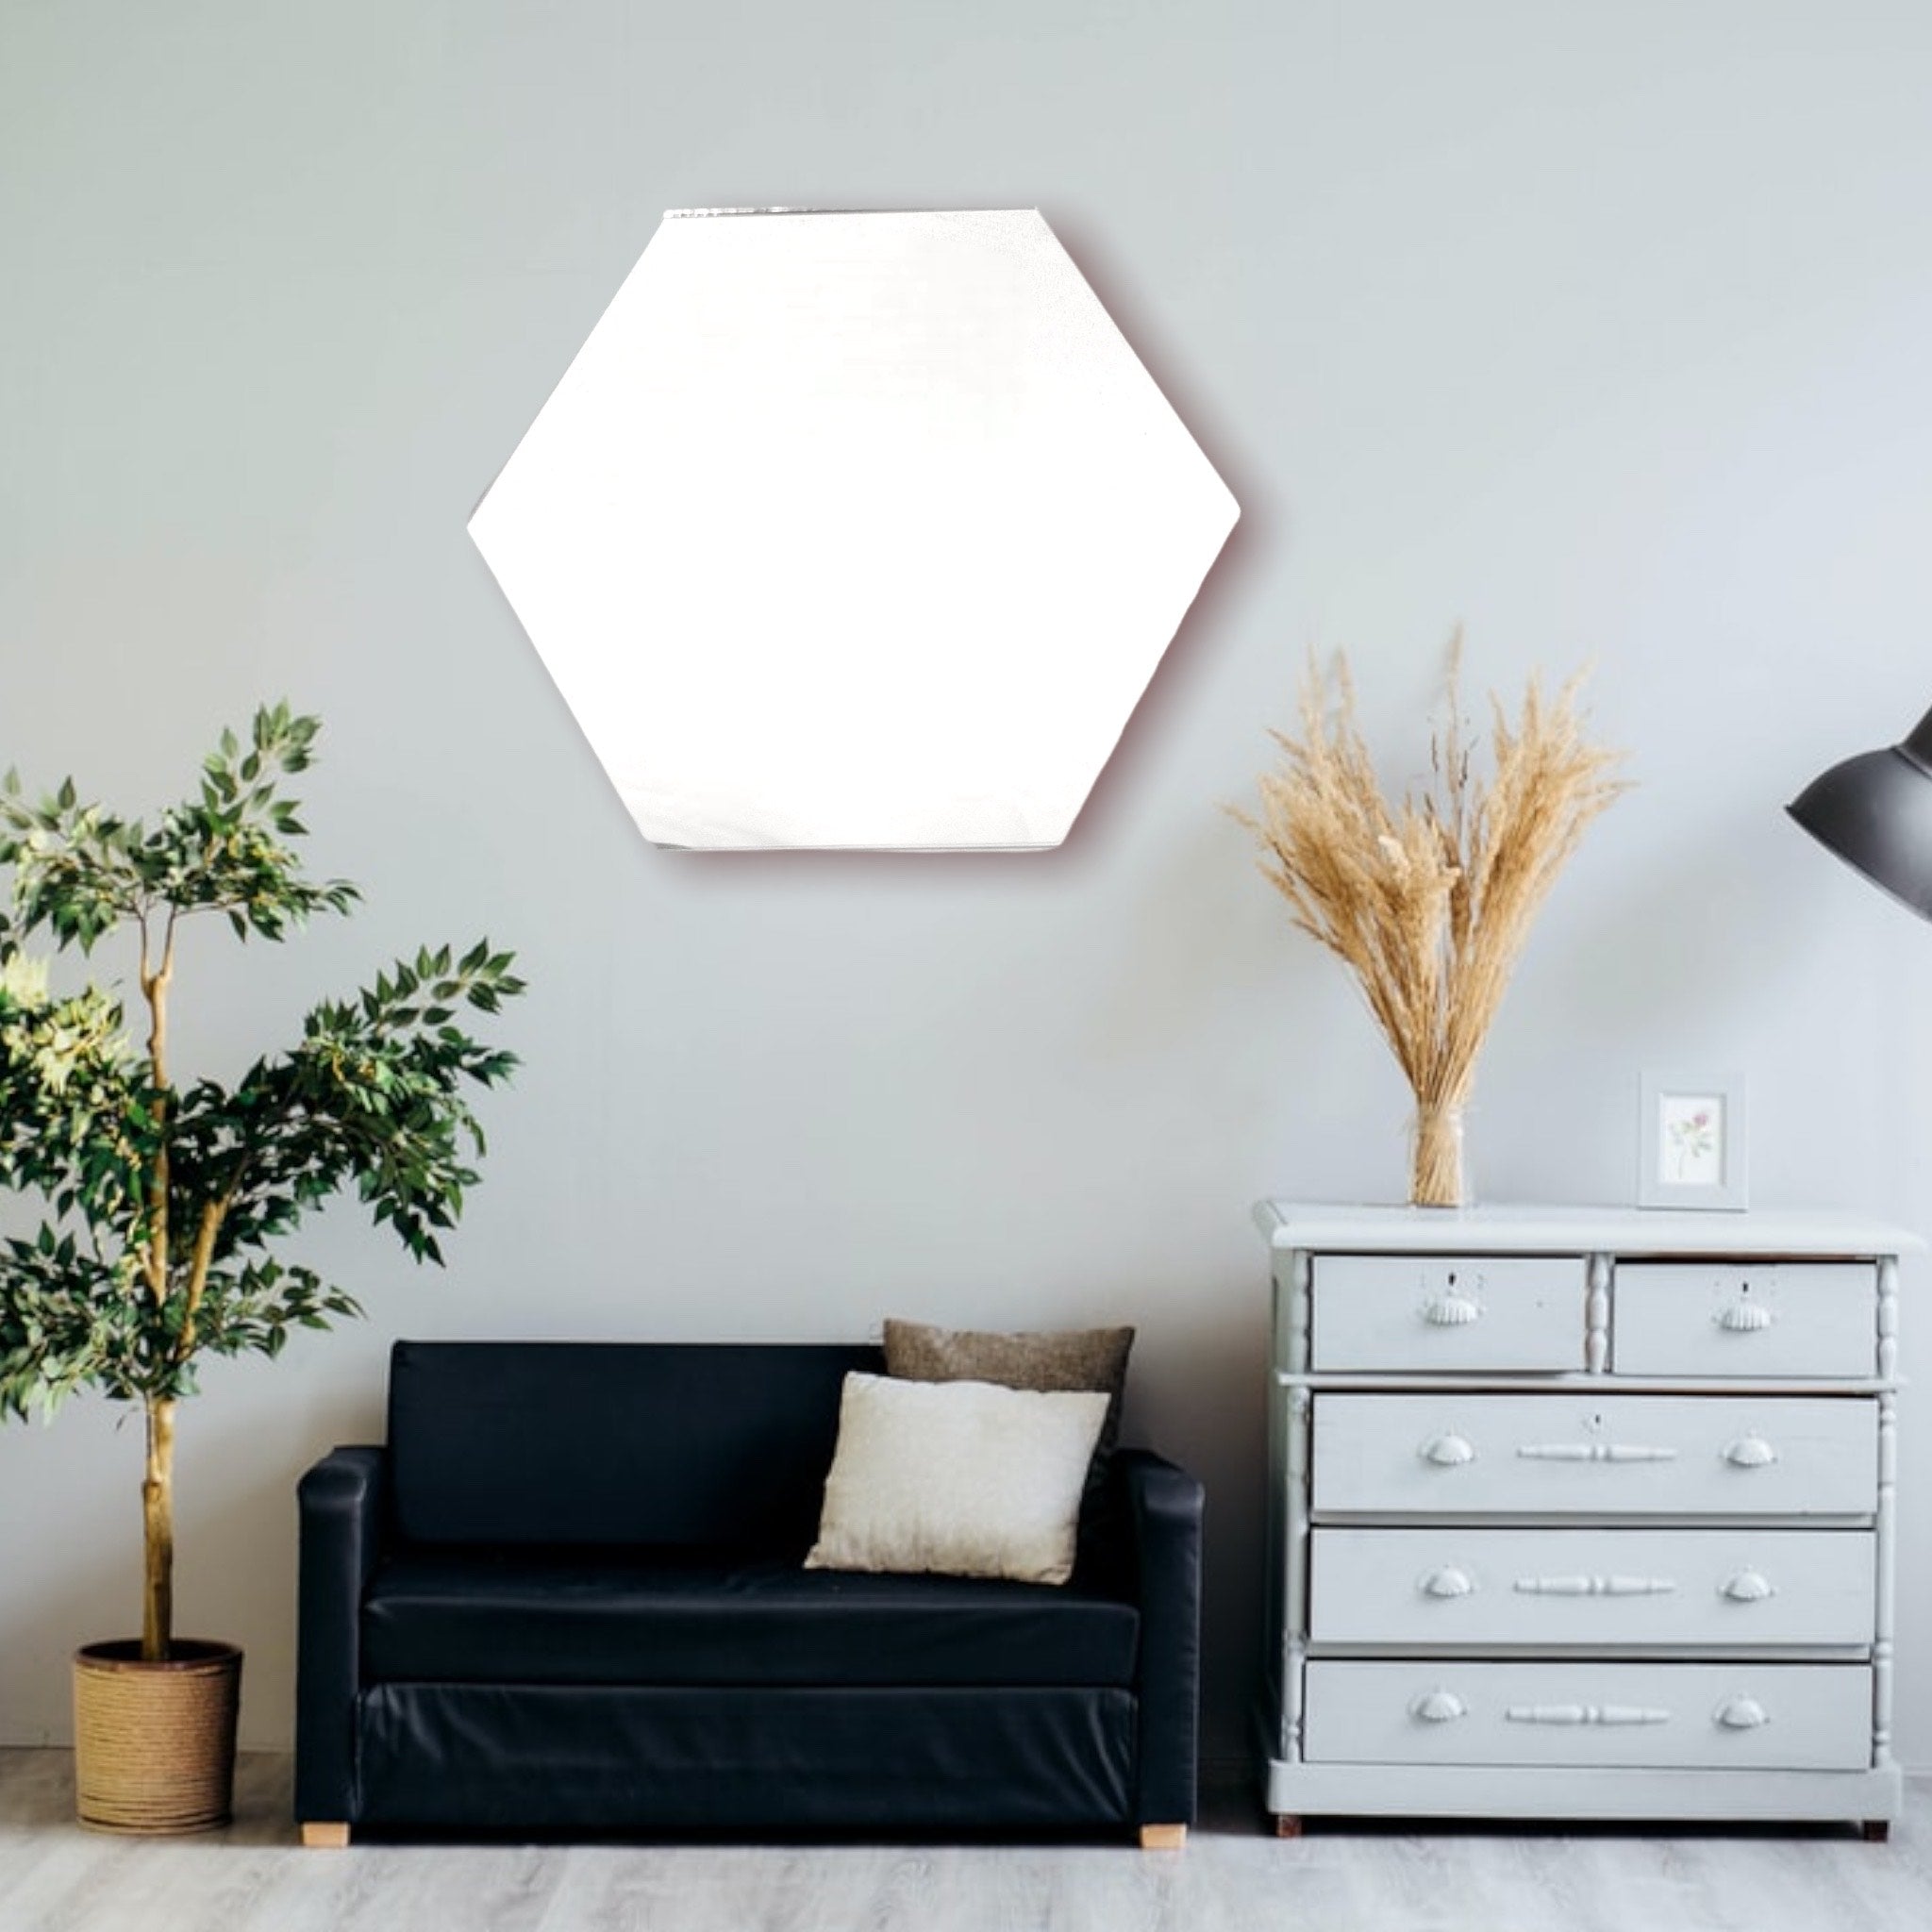 Hexagon Shaped Mirrors with White Backing & Hooks